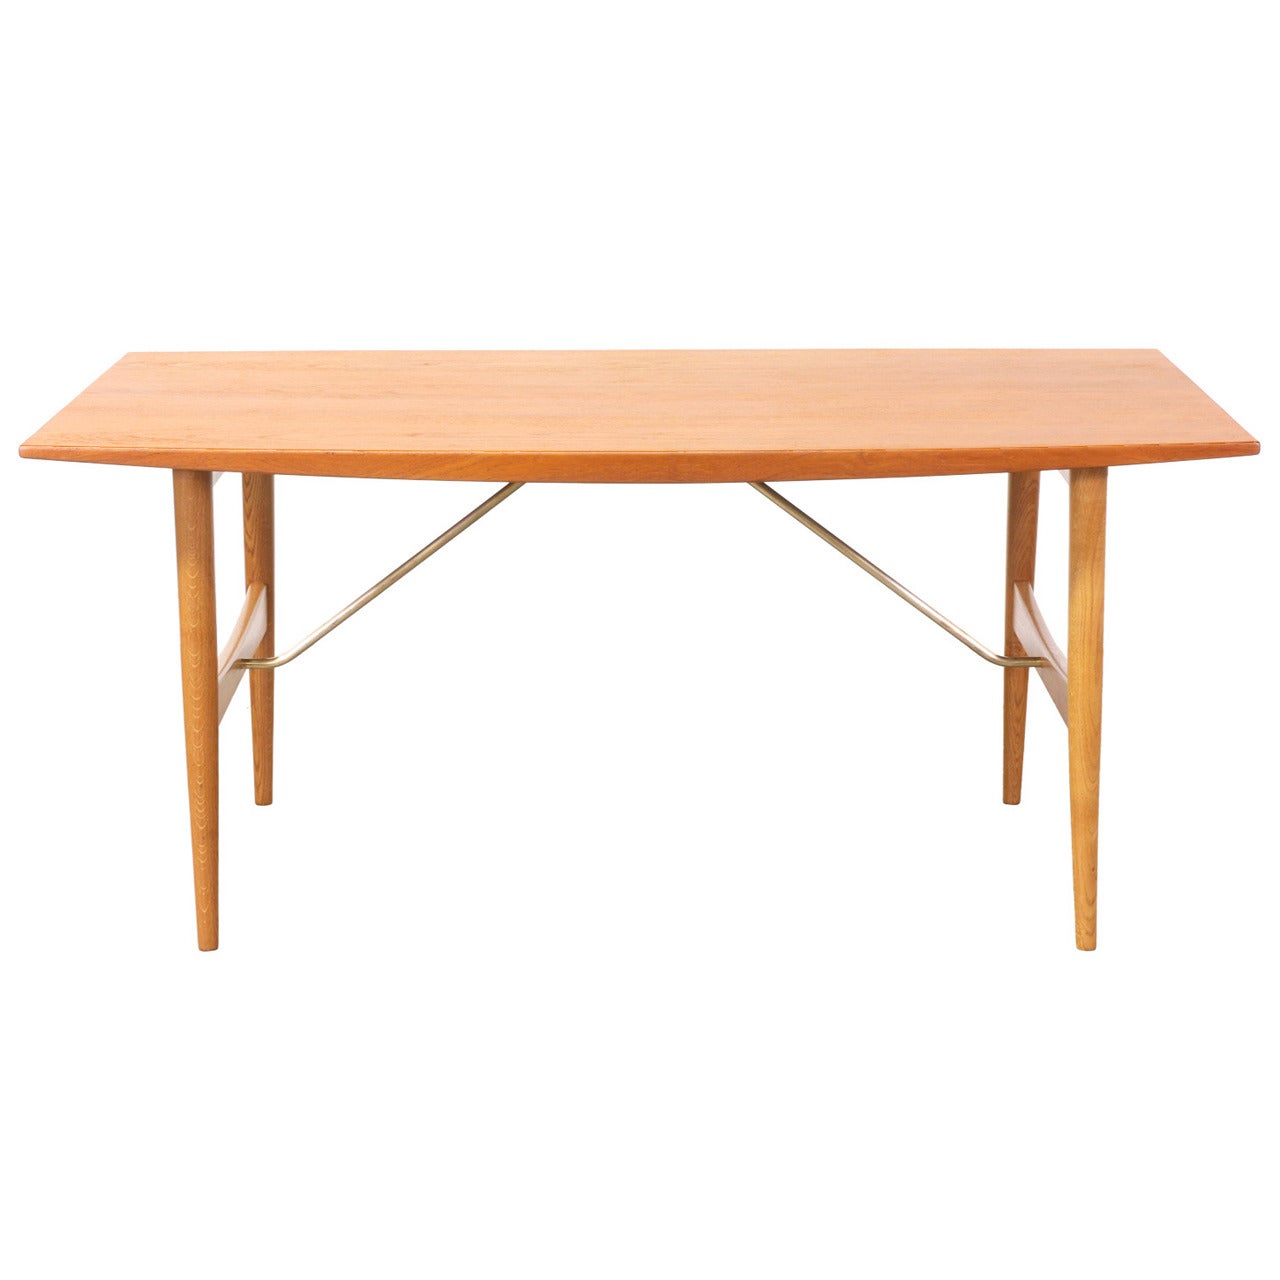 Danish Modern Teak and Oak Dining Table with Brass Accent